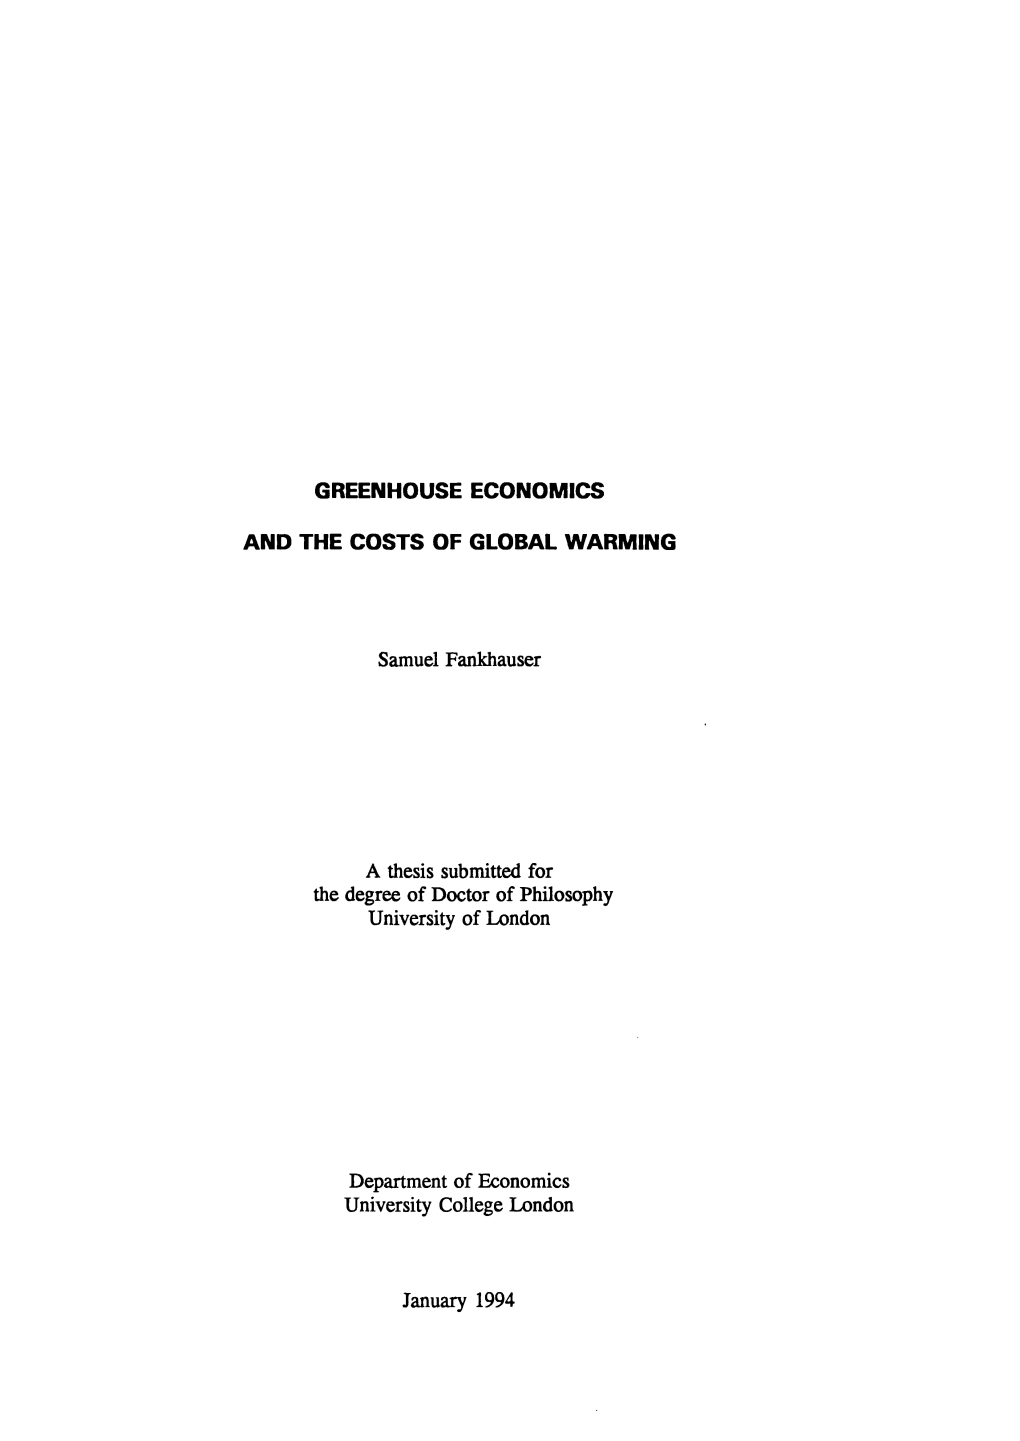 Greenhouse Economics and the Costs of Global Warming